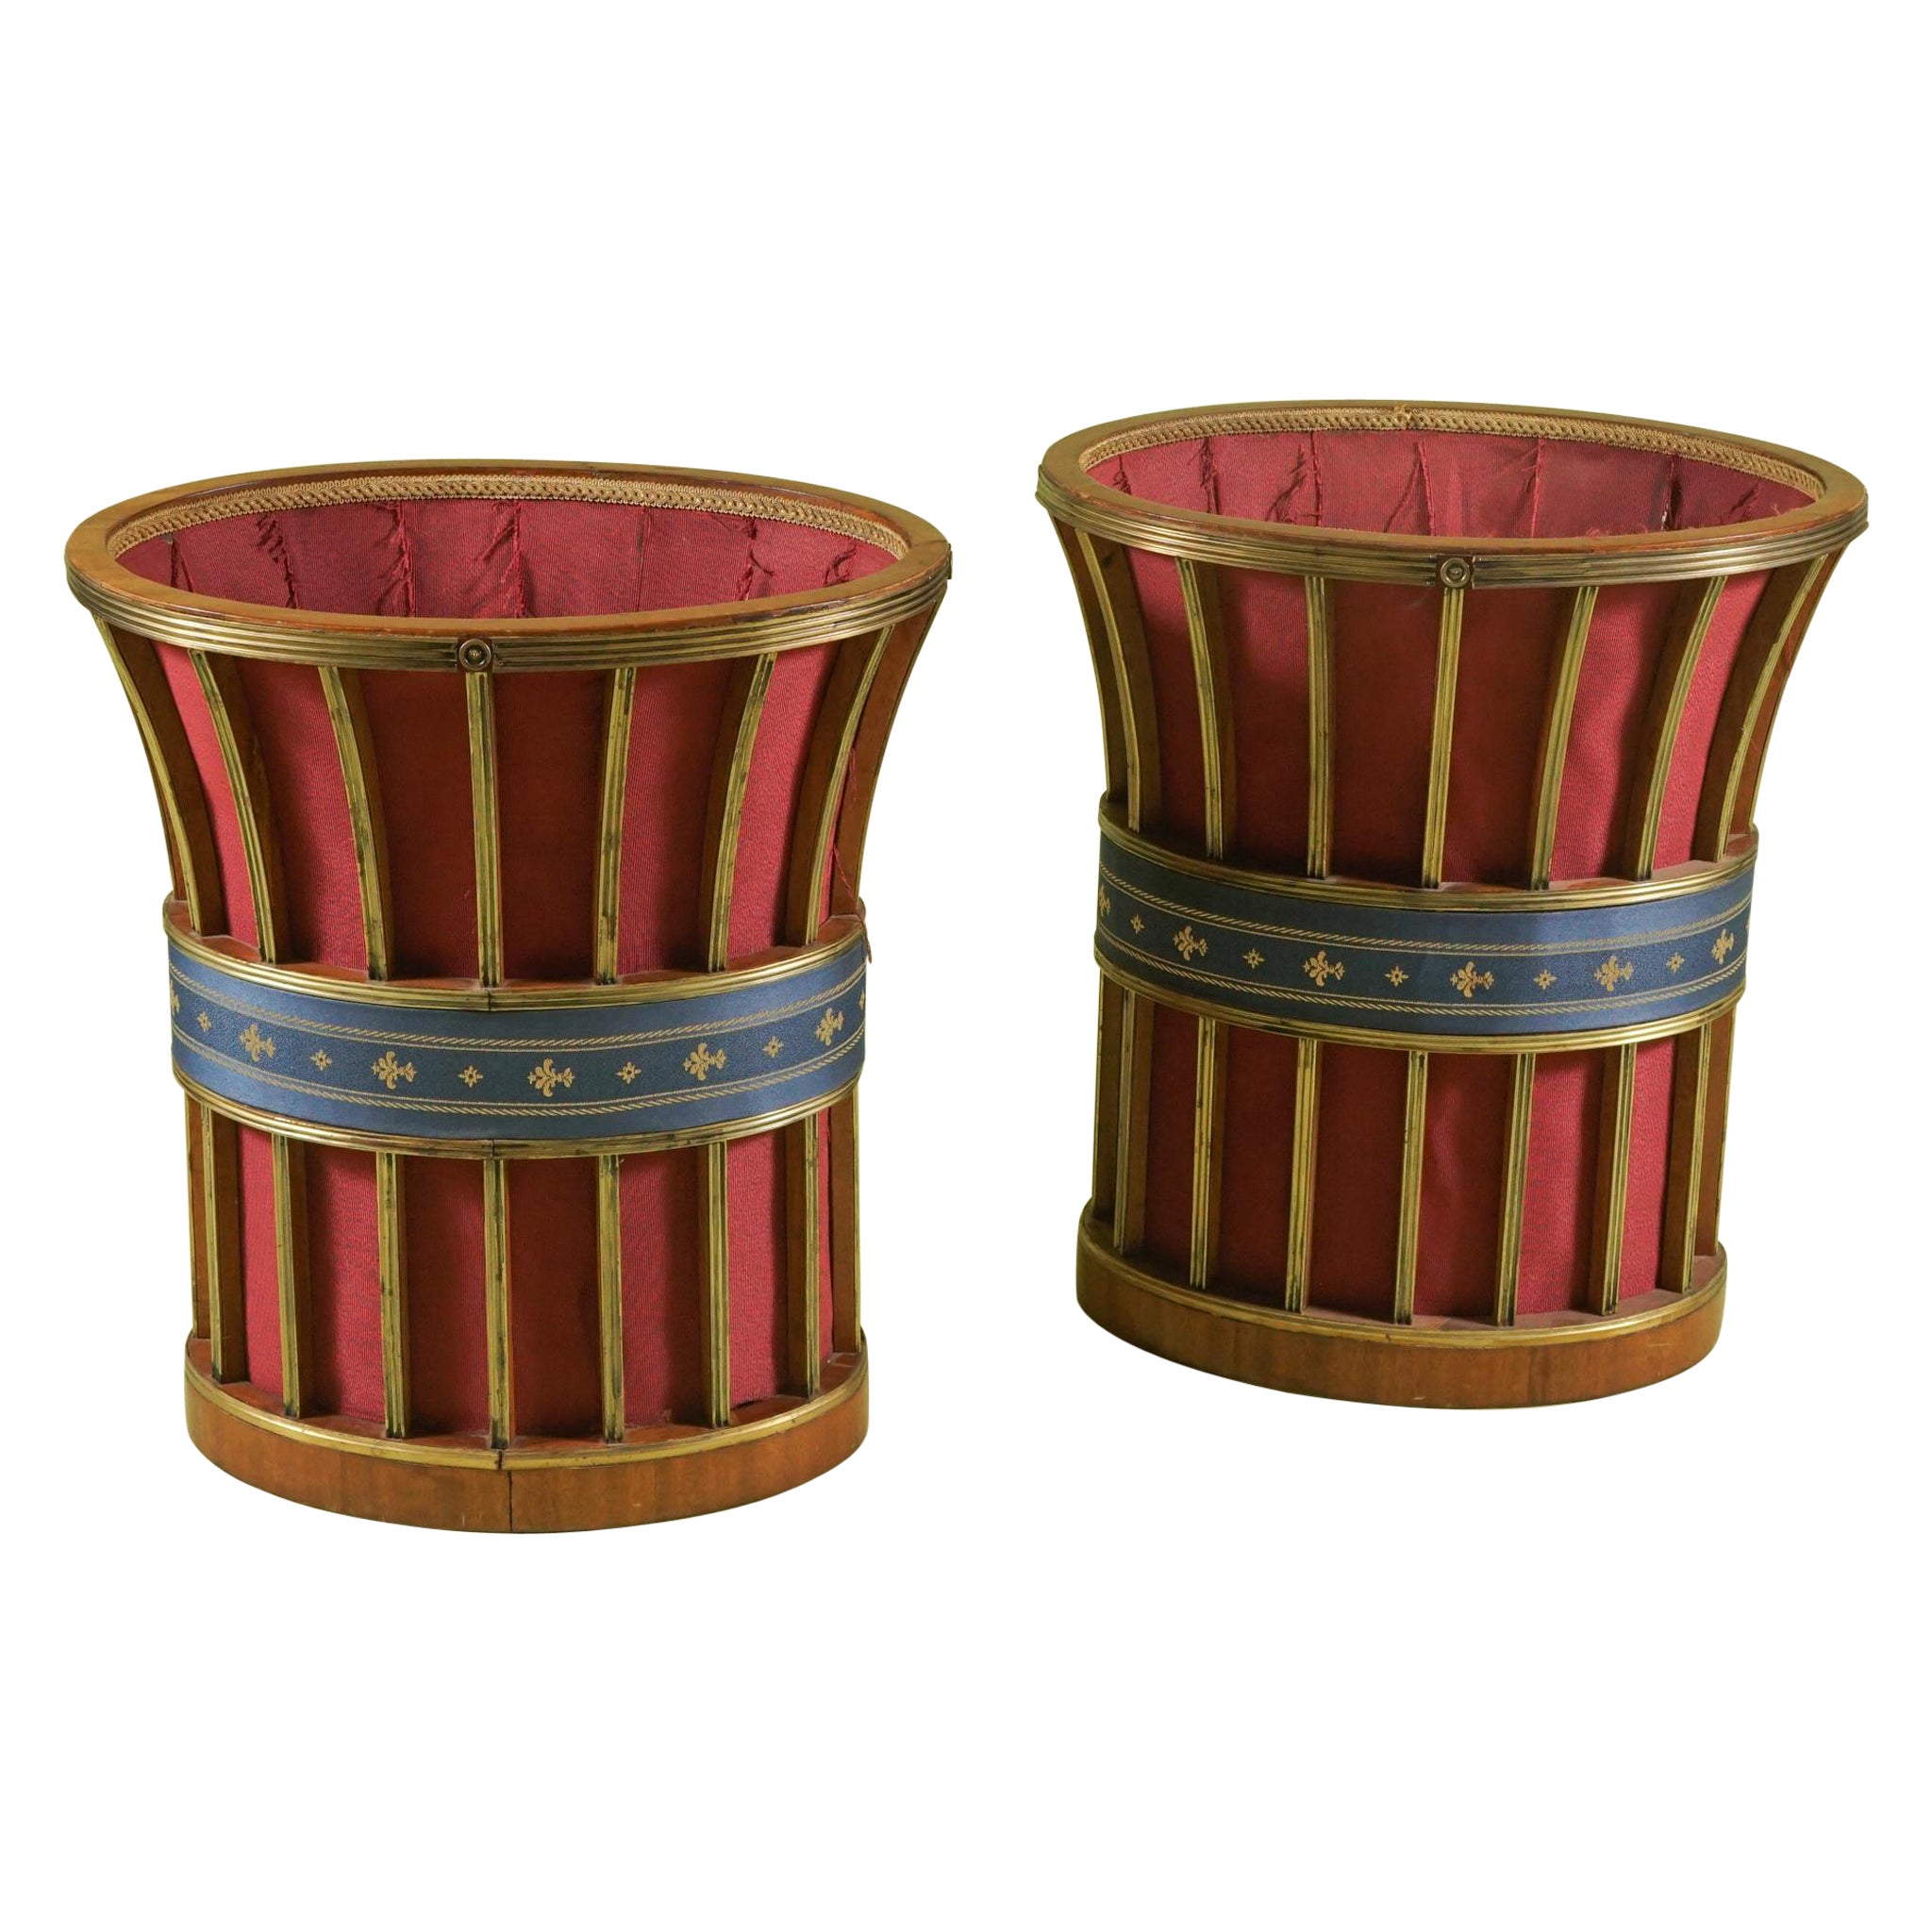 Pair of Large 19th Century Russian Neoclassic Brass Decorated Mahogany Baskets For Sale